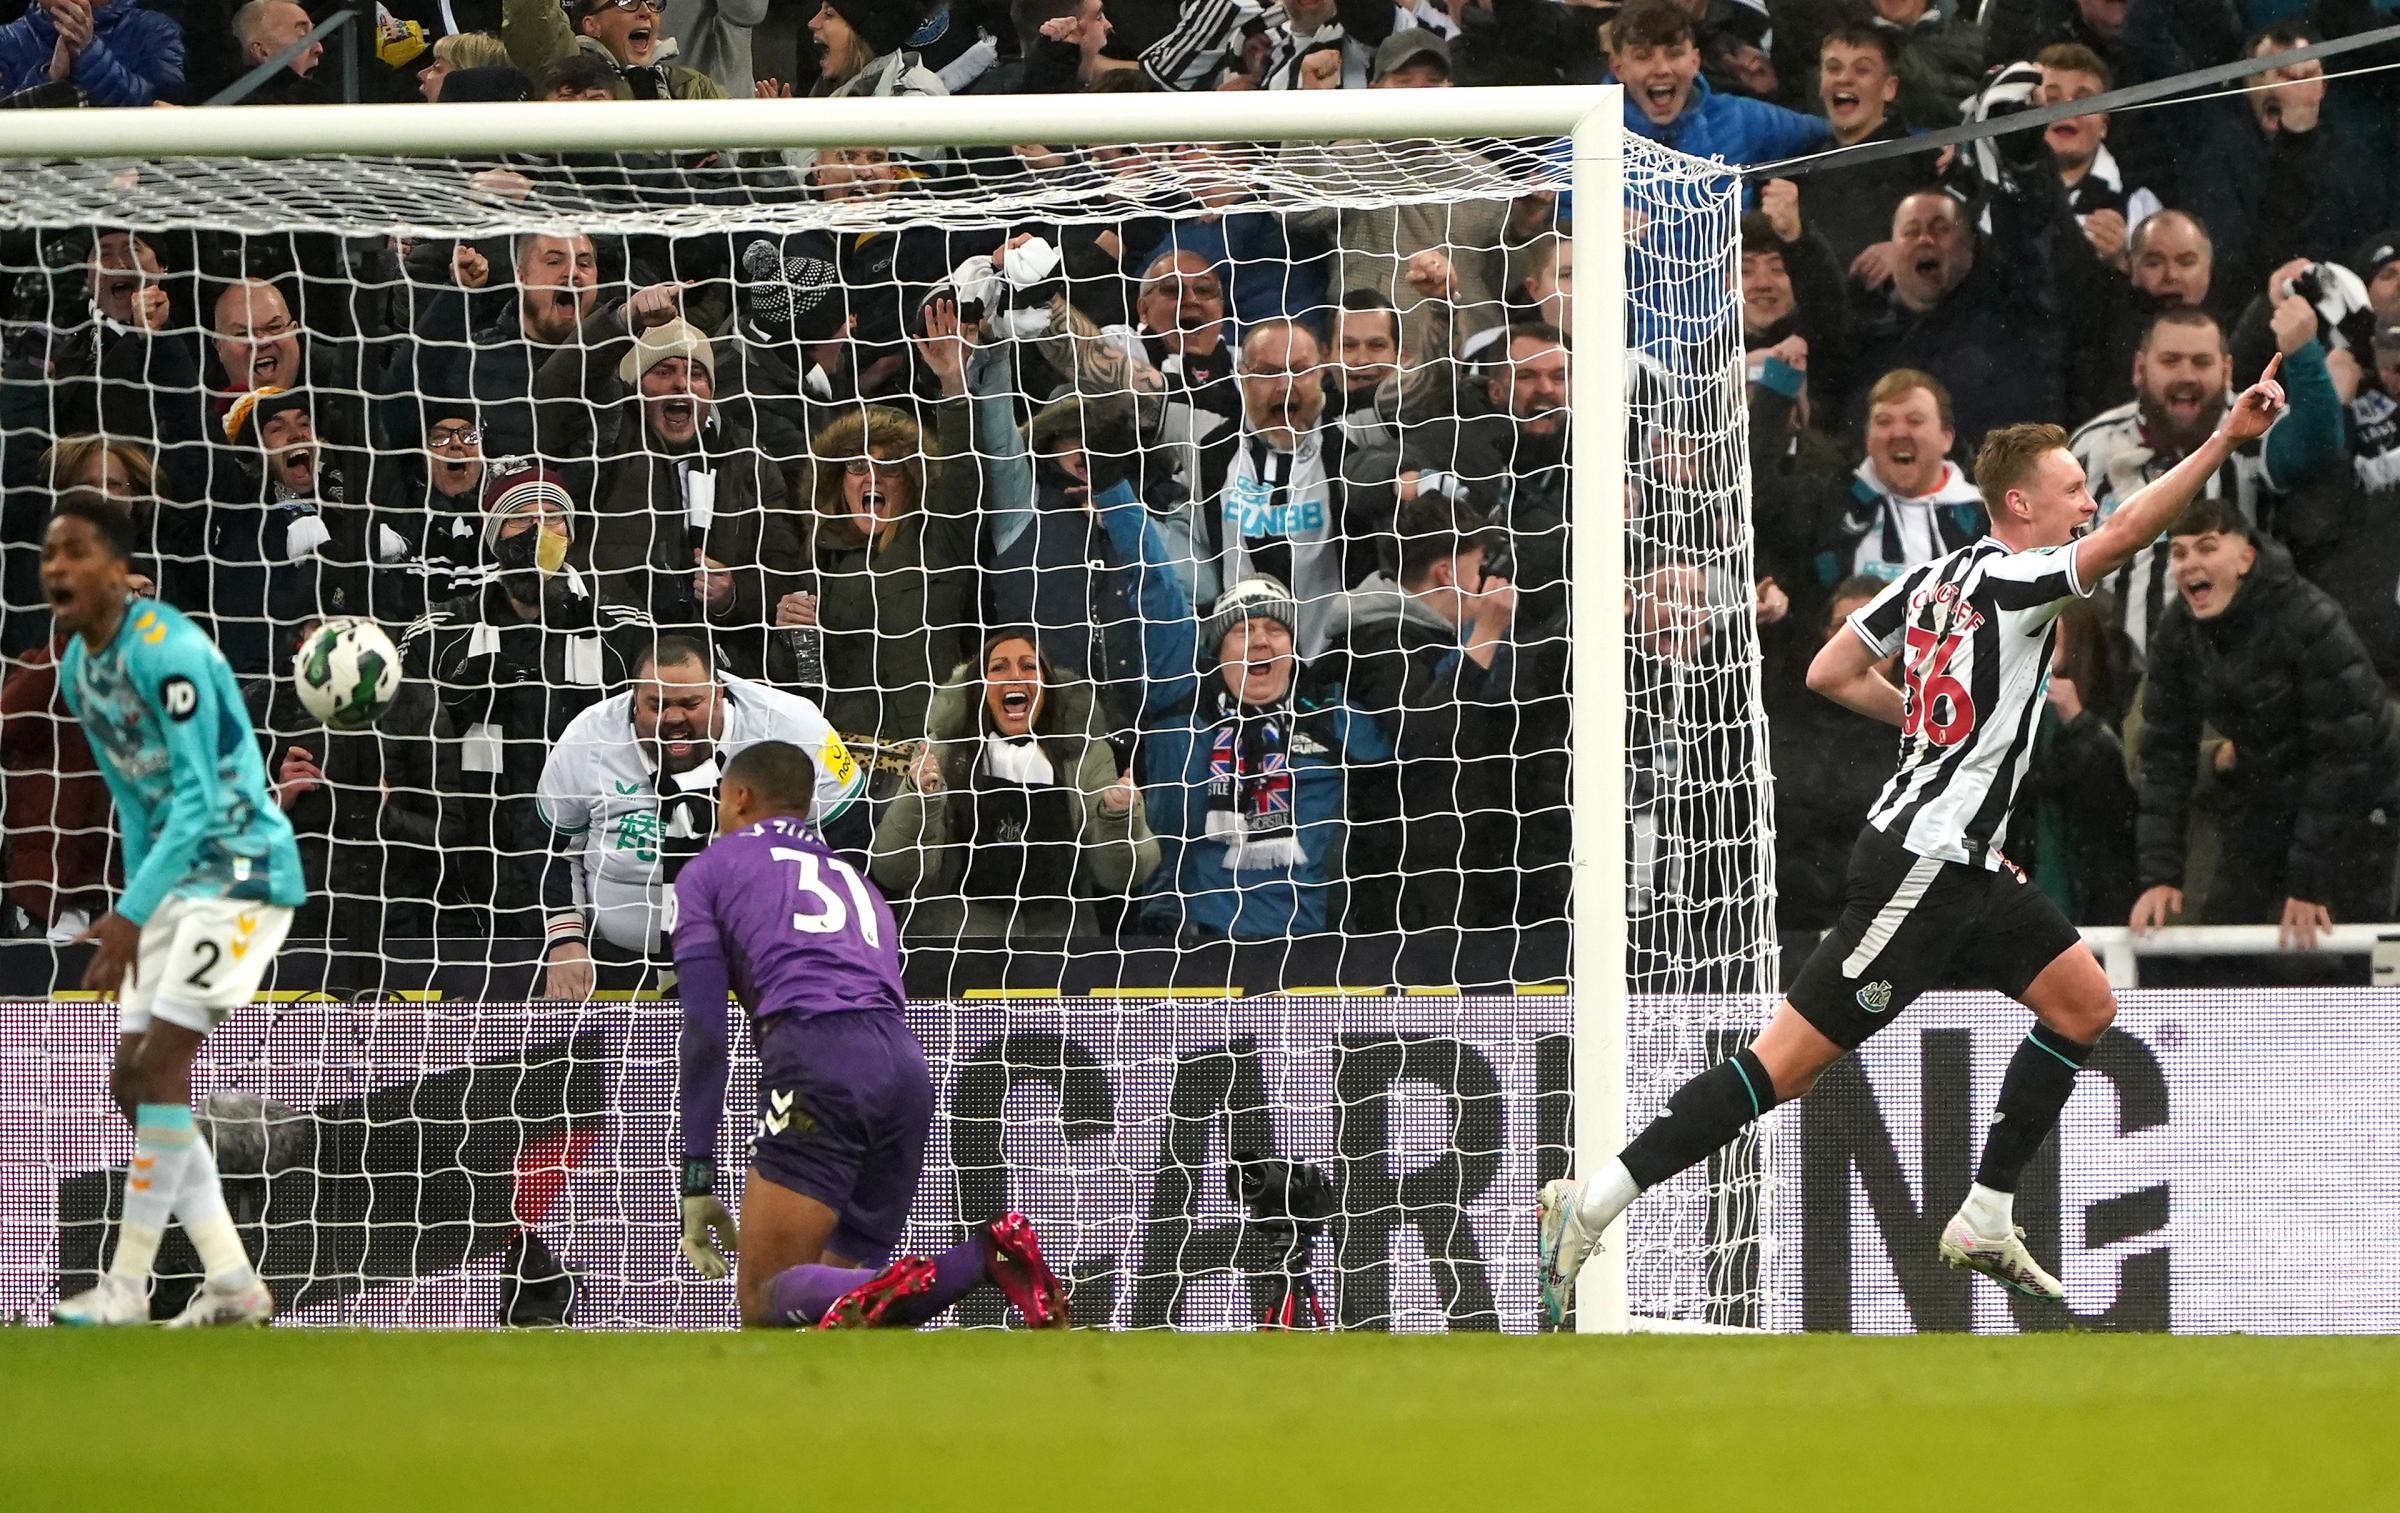 Newcastle United 2 - 1 Southampton FC: Match debrief video review